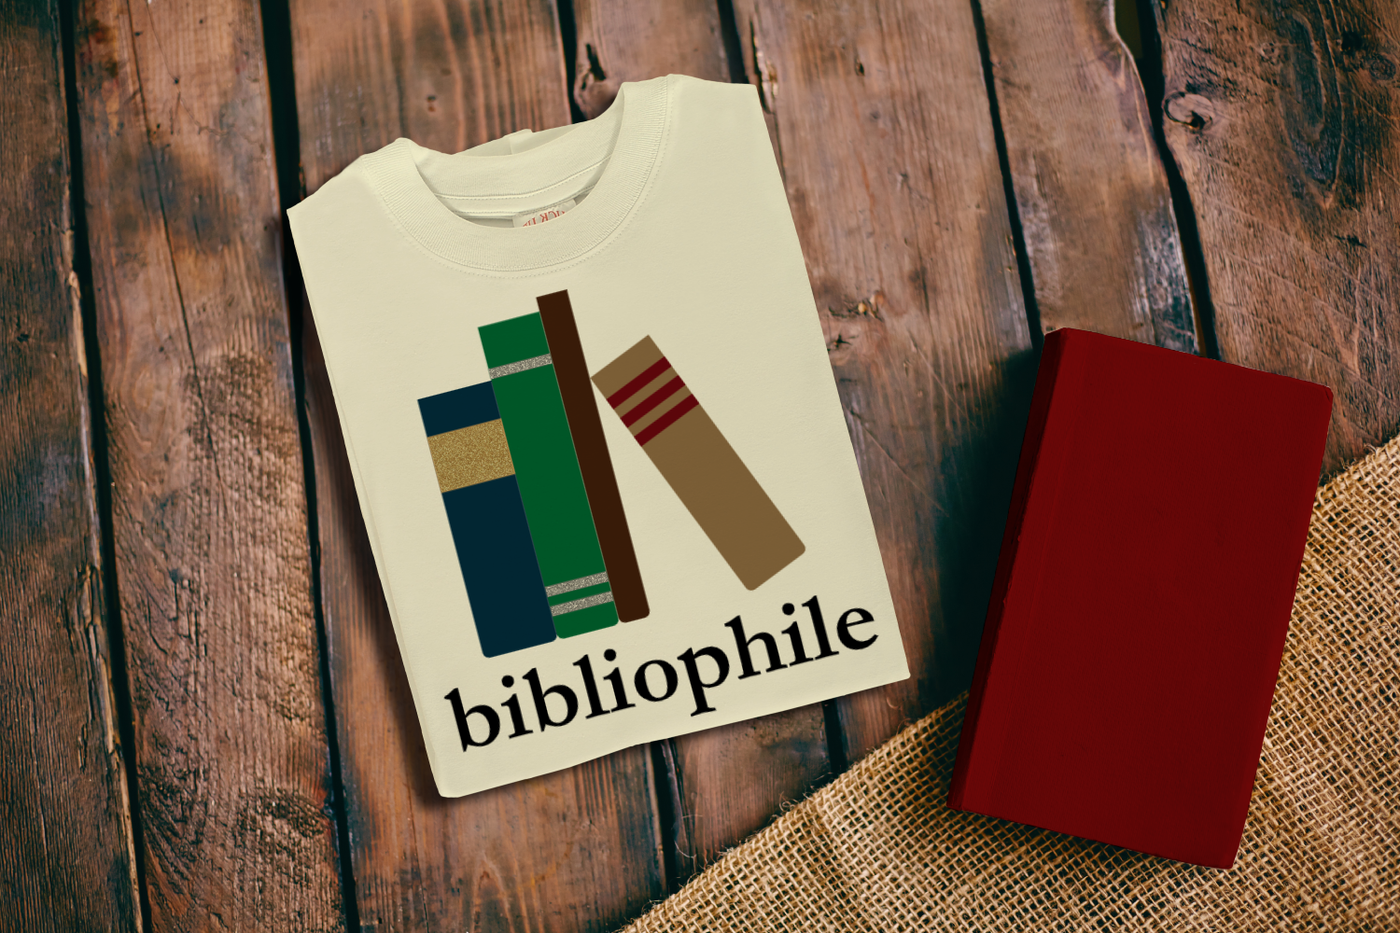 A folded ivory shirt on a wood background with a red book laying nearby. The shirt has a design of 4 book spines and underneath is the word "bibliophile."